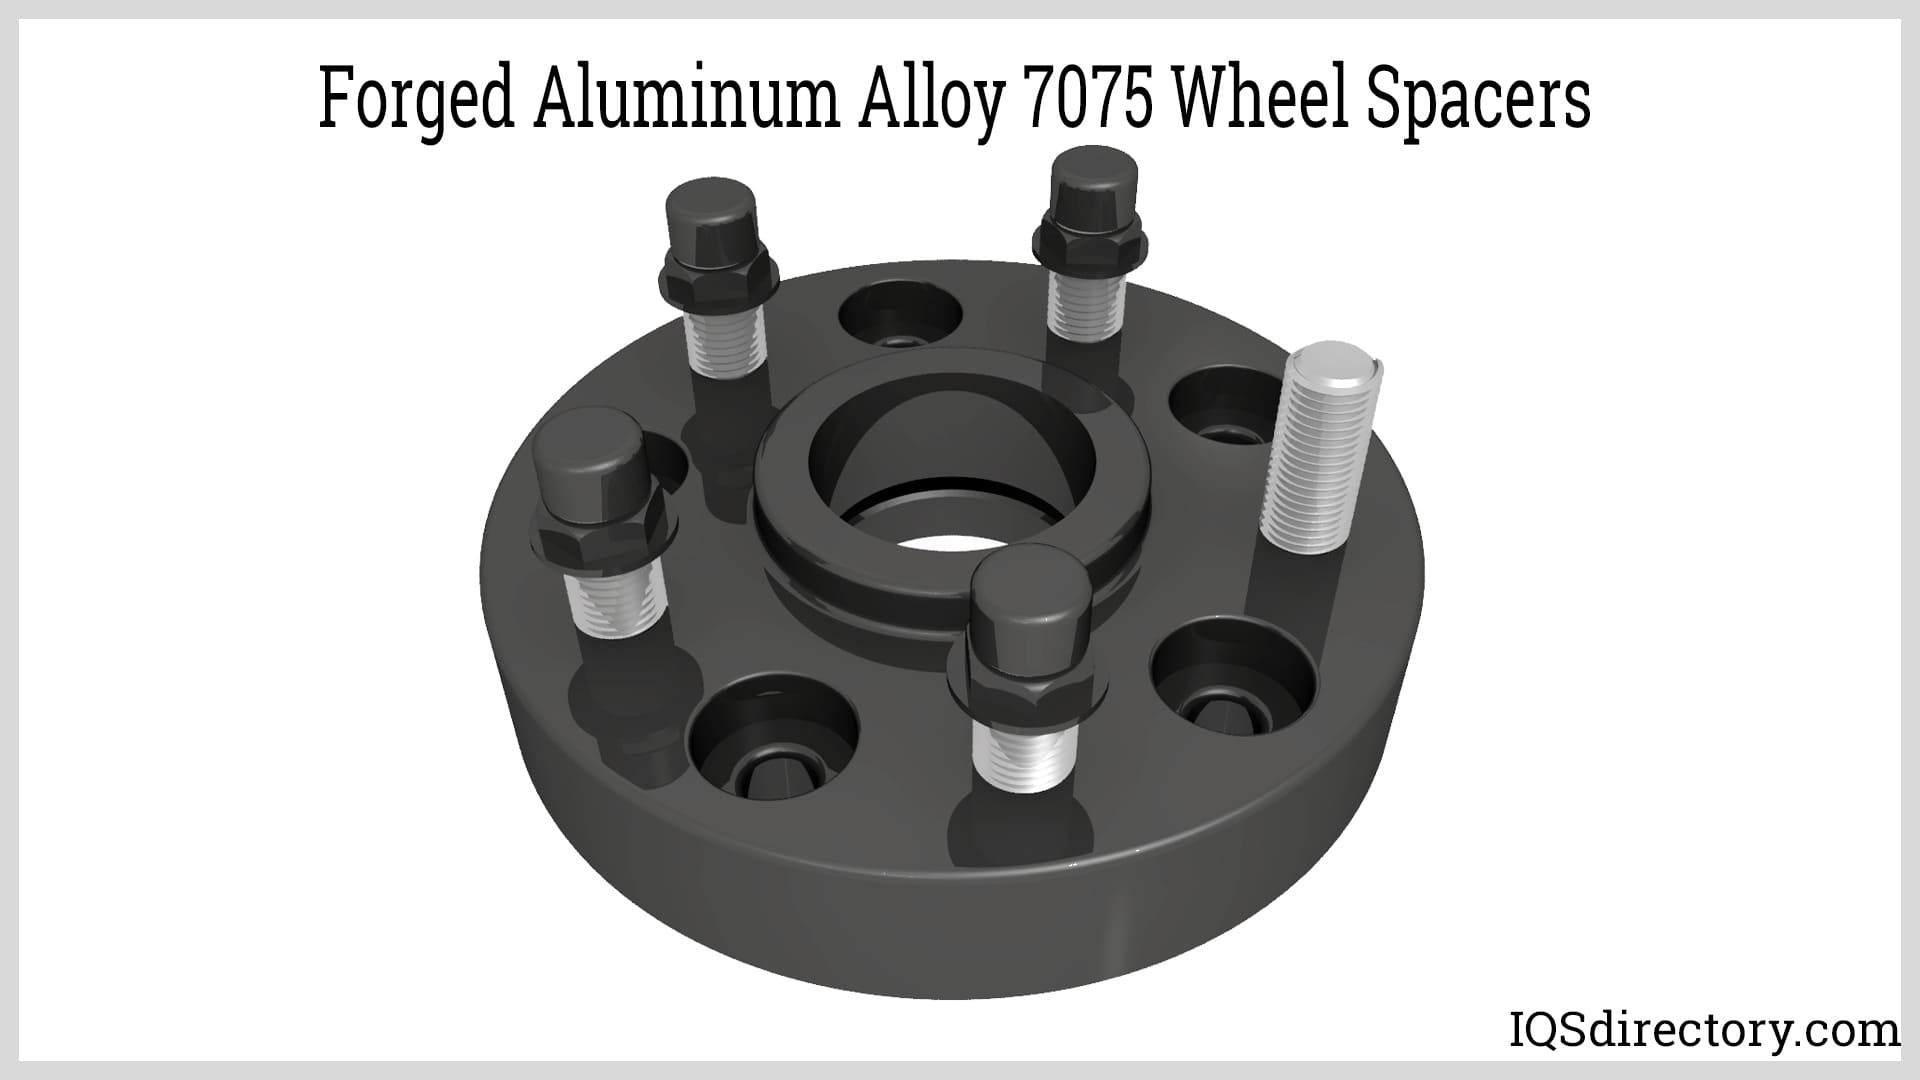 Forged Aluminum Alloy 7075 Wheel Spacers